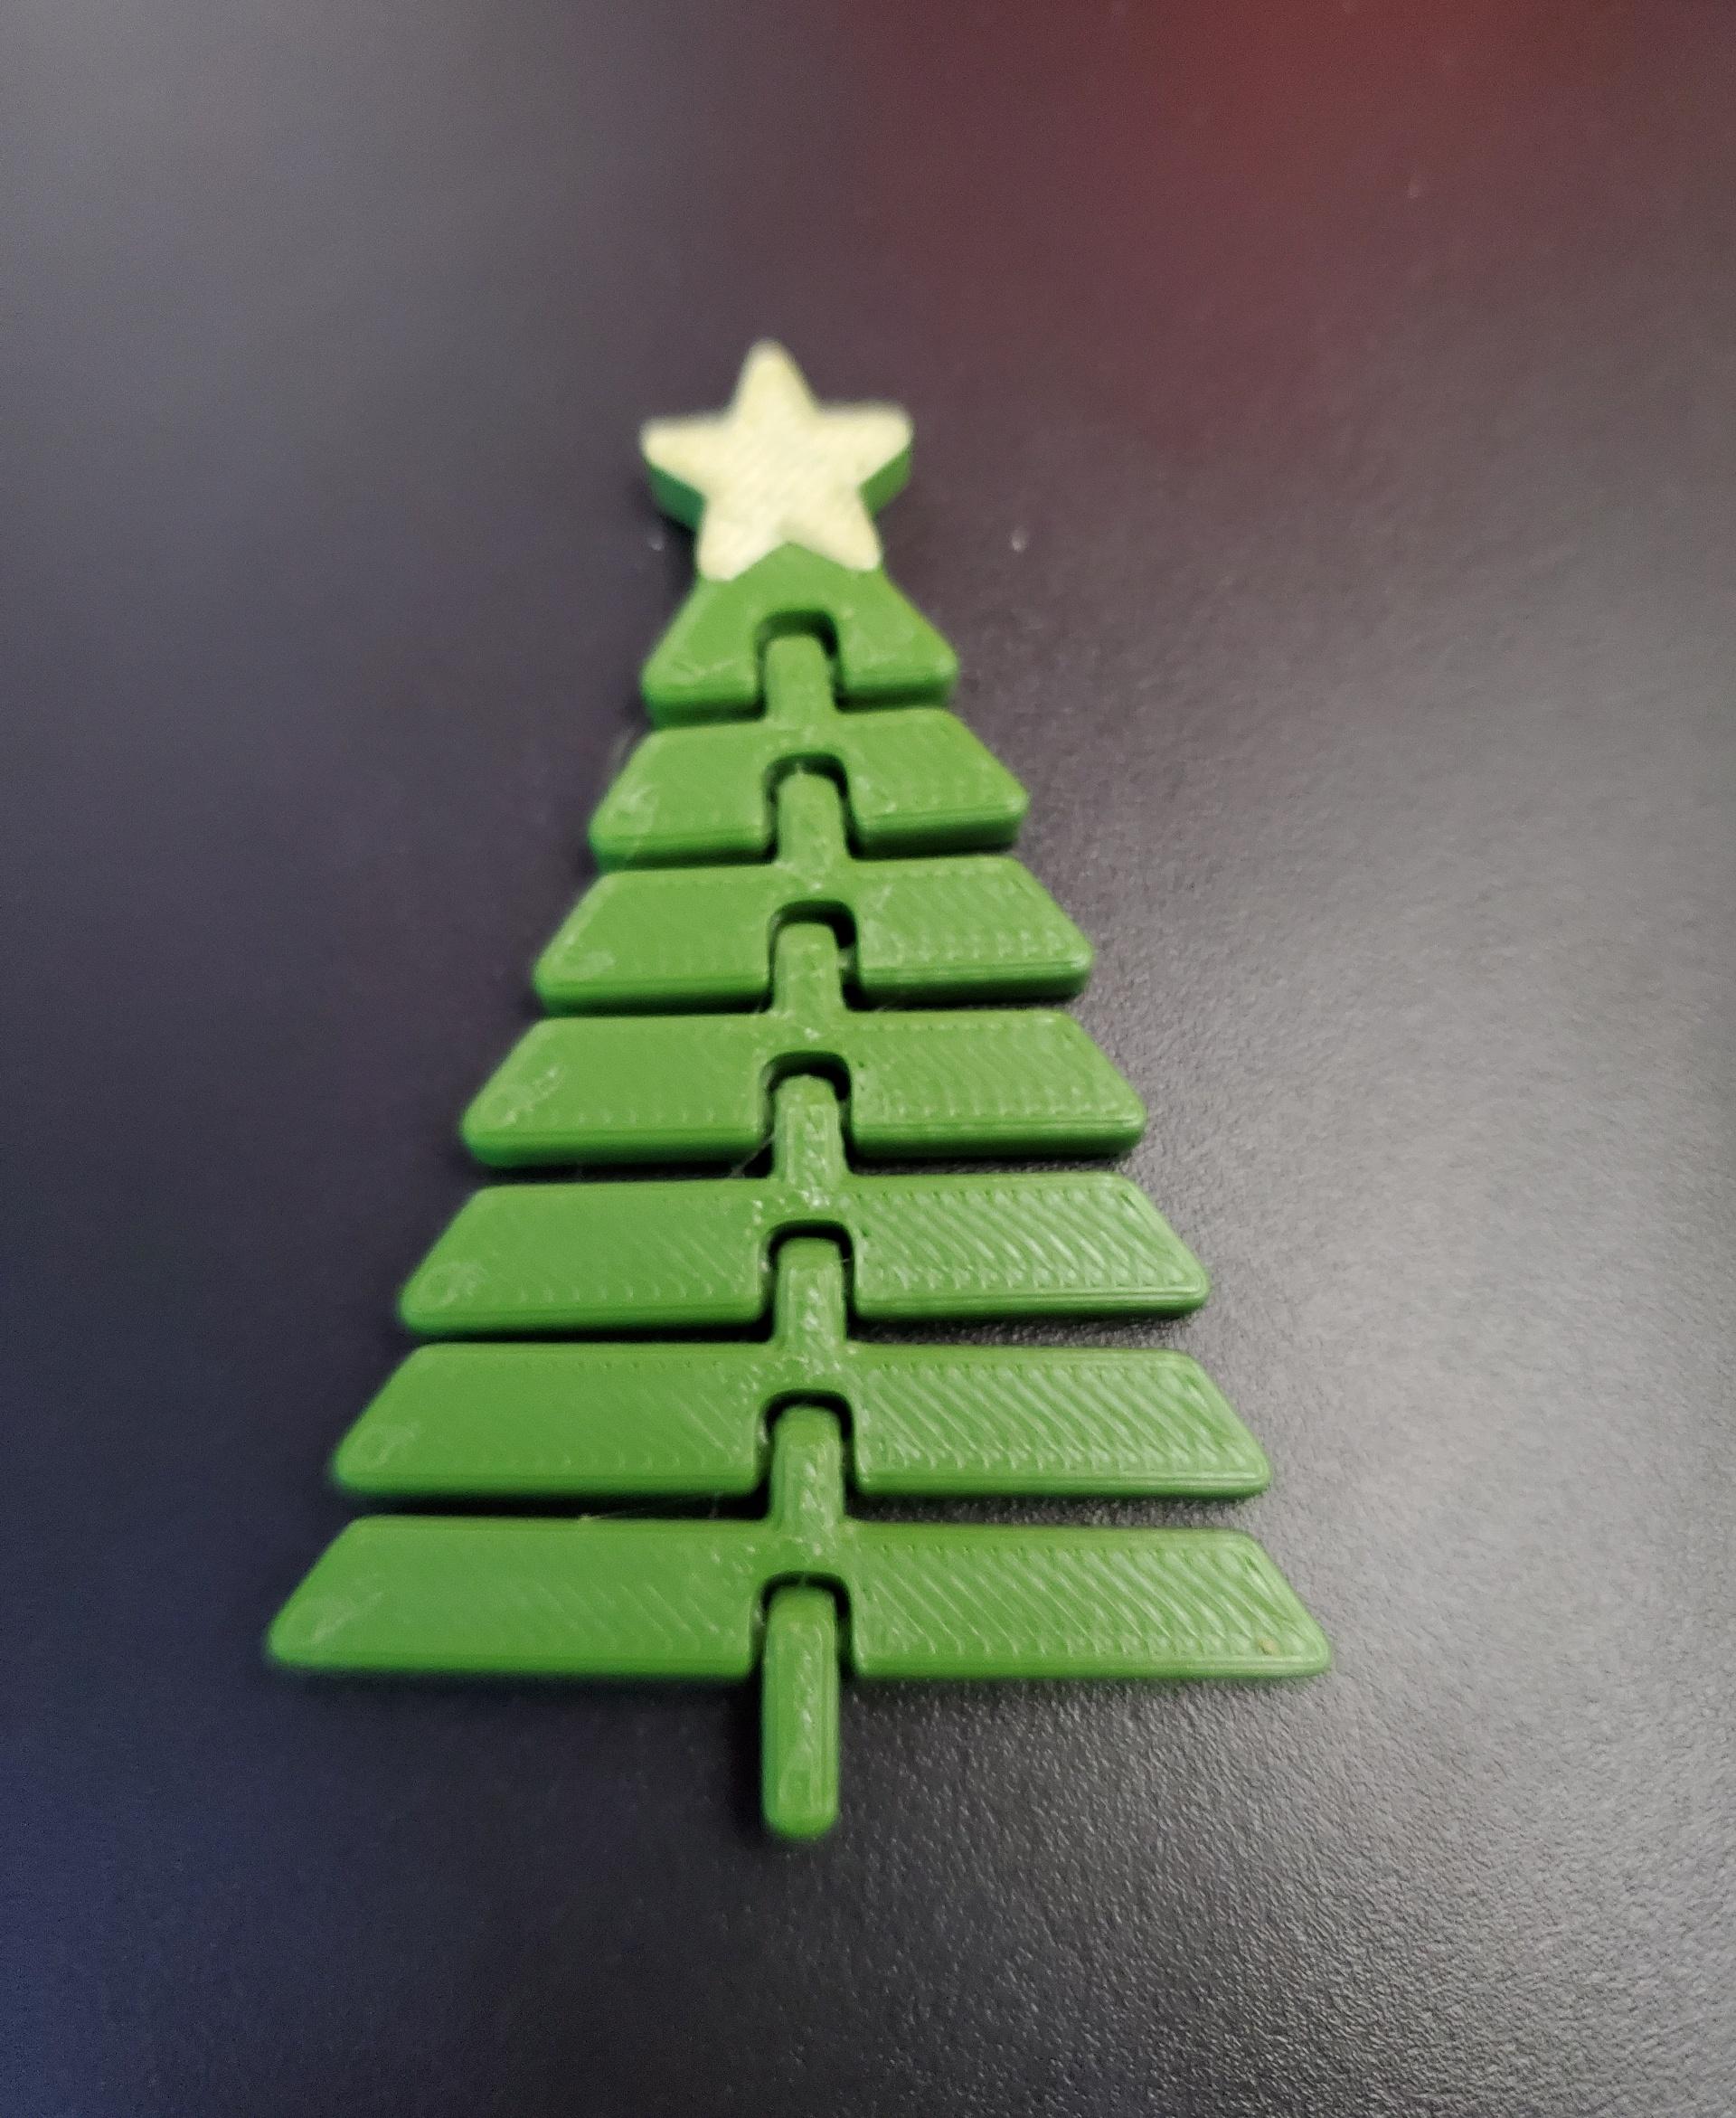 Articulated Christmas Tree with Star - Print in place fidget toy - 3mf - polymaker jungle green - 3d model